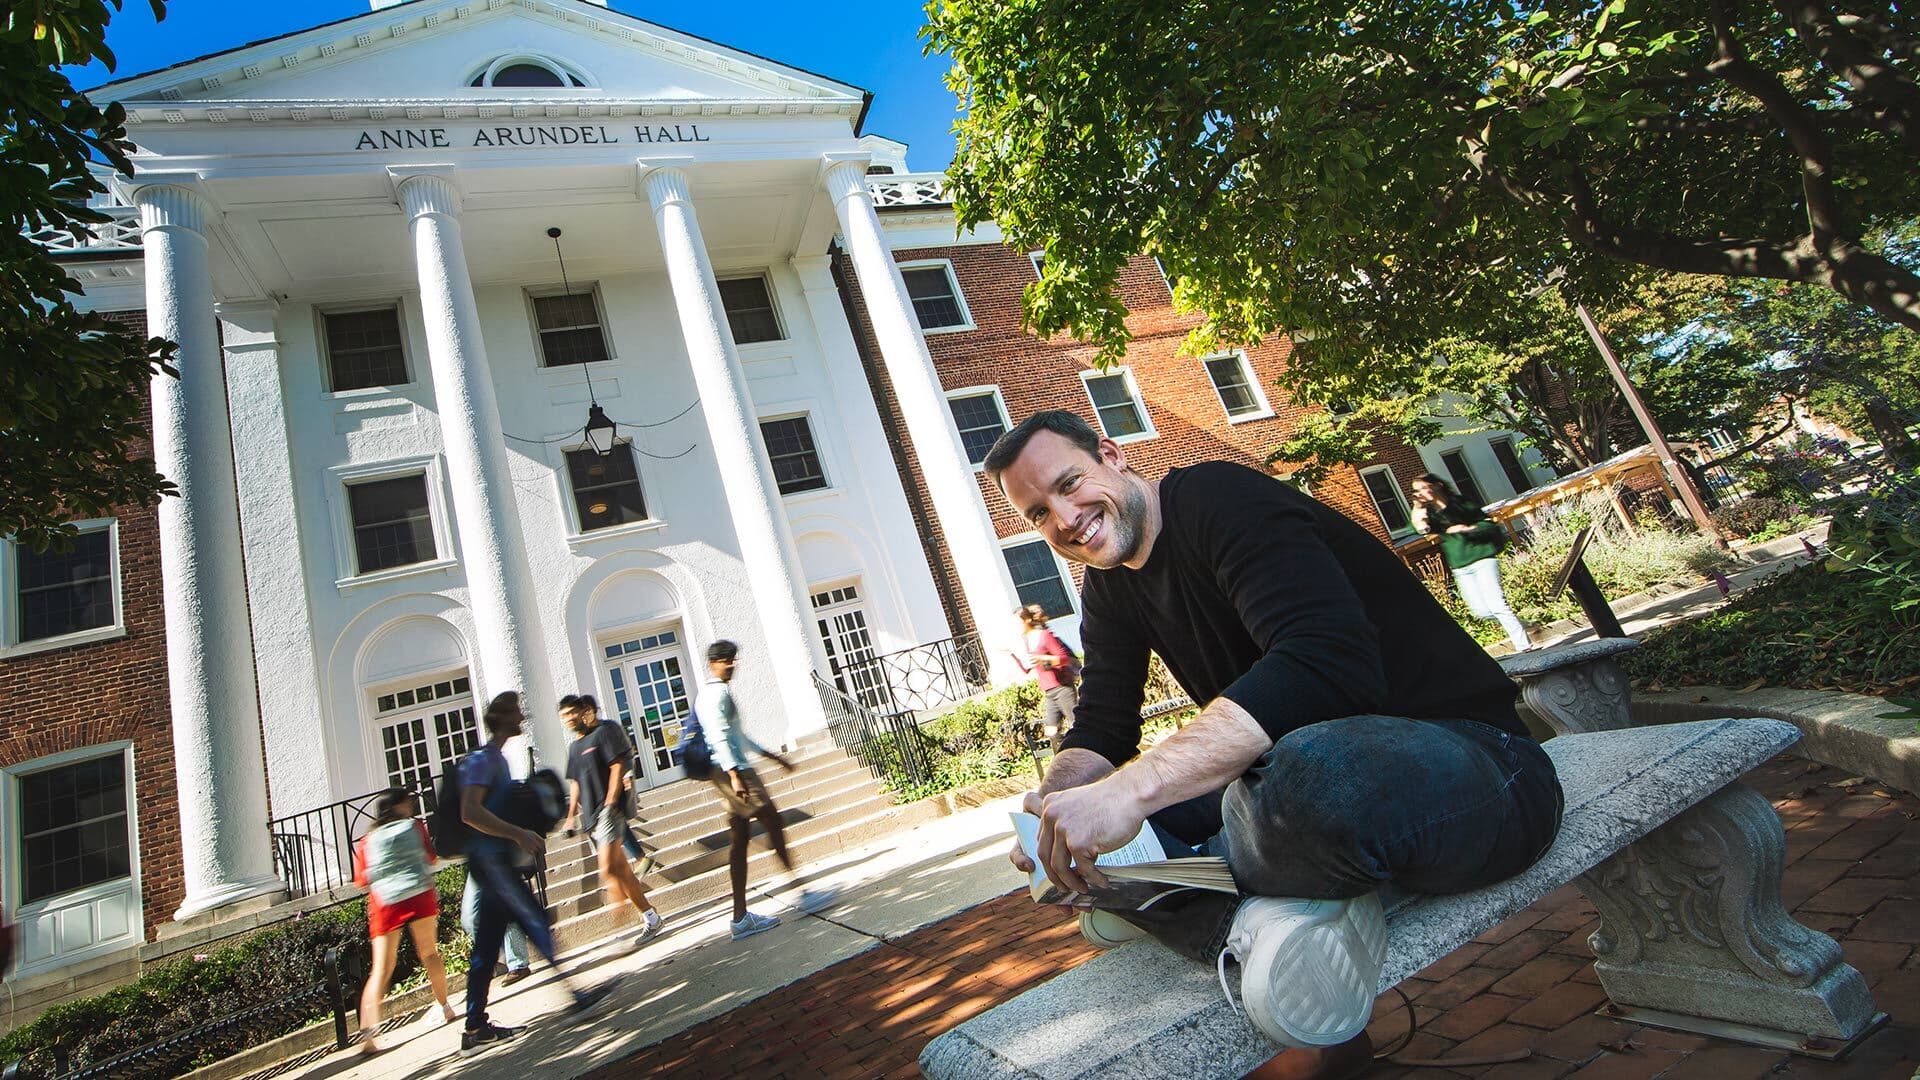 Visiting professor Gero Bauer sits in front of Anne Arundel Hall